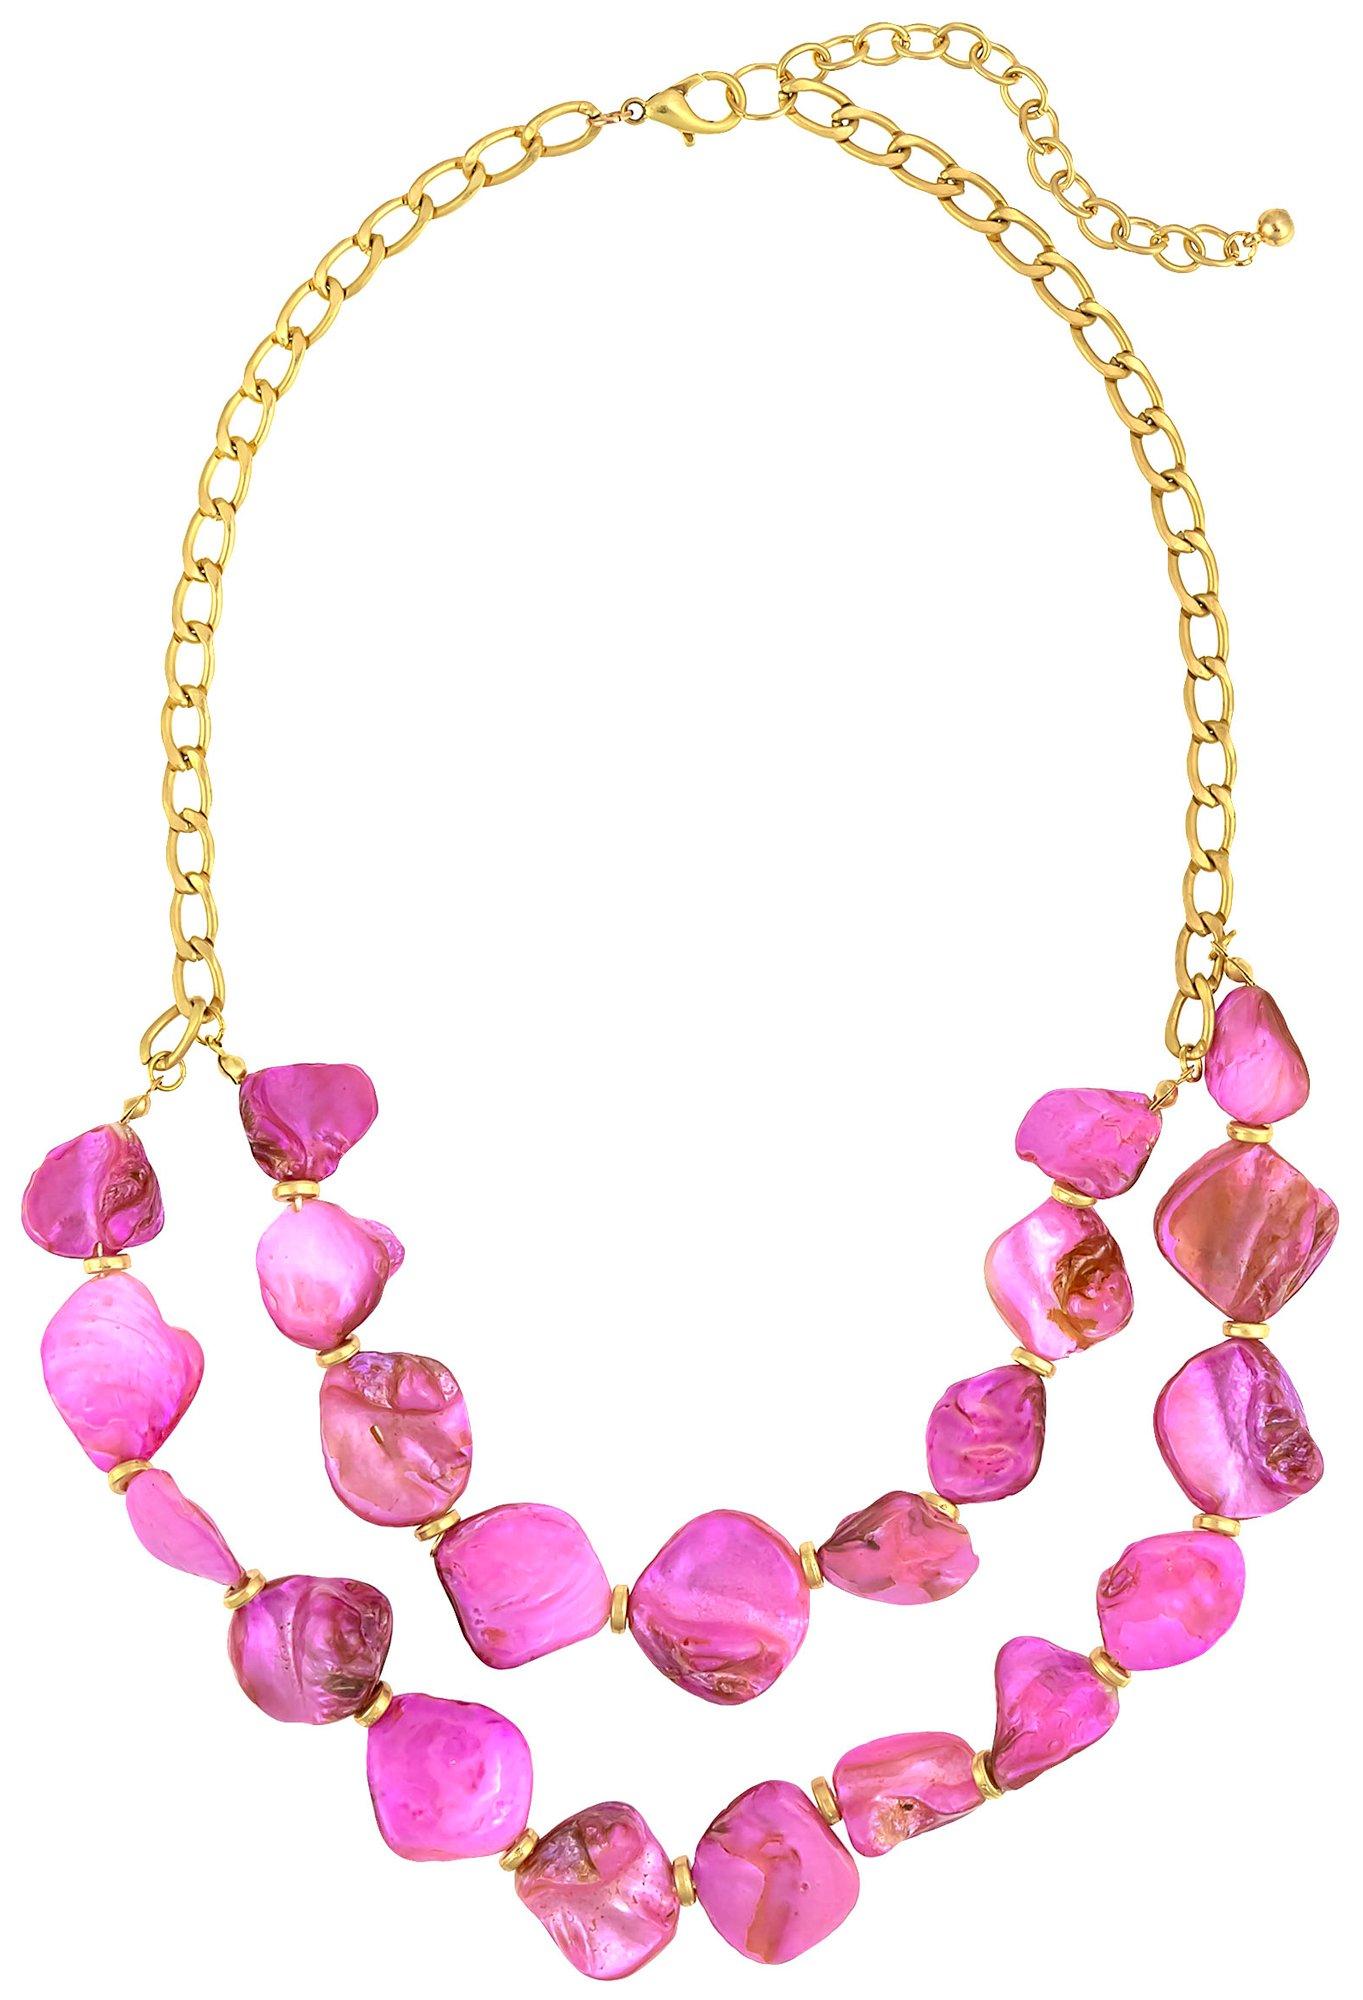 Bay Studio 22 In. 2-Row Shell Chip Frontal Necklace